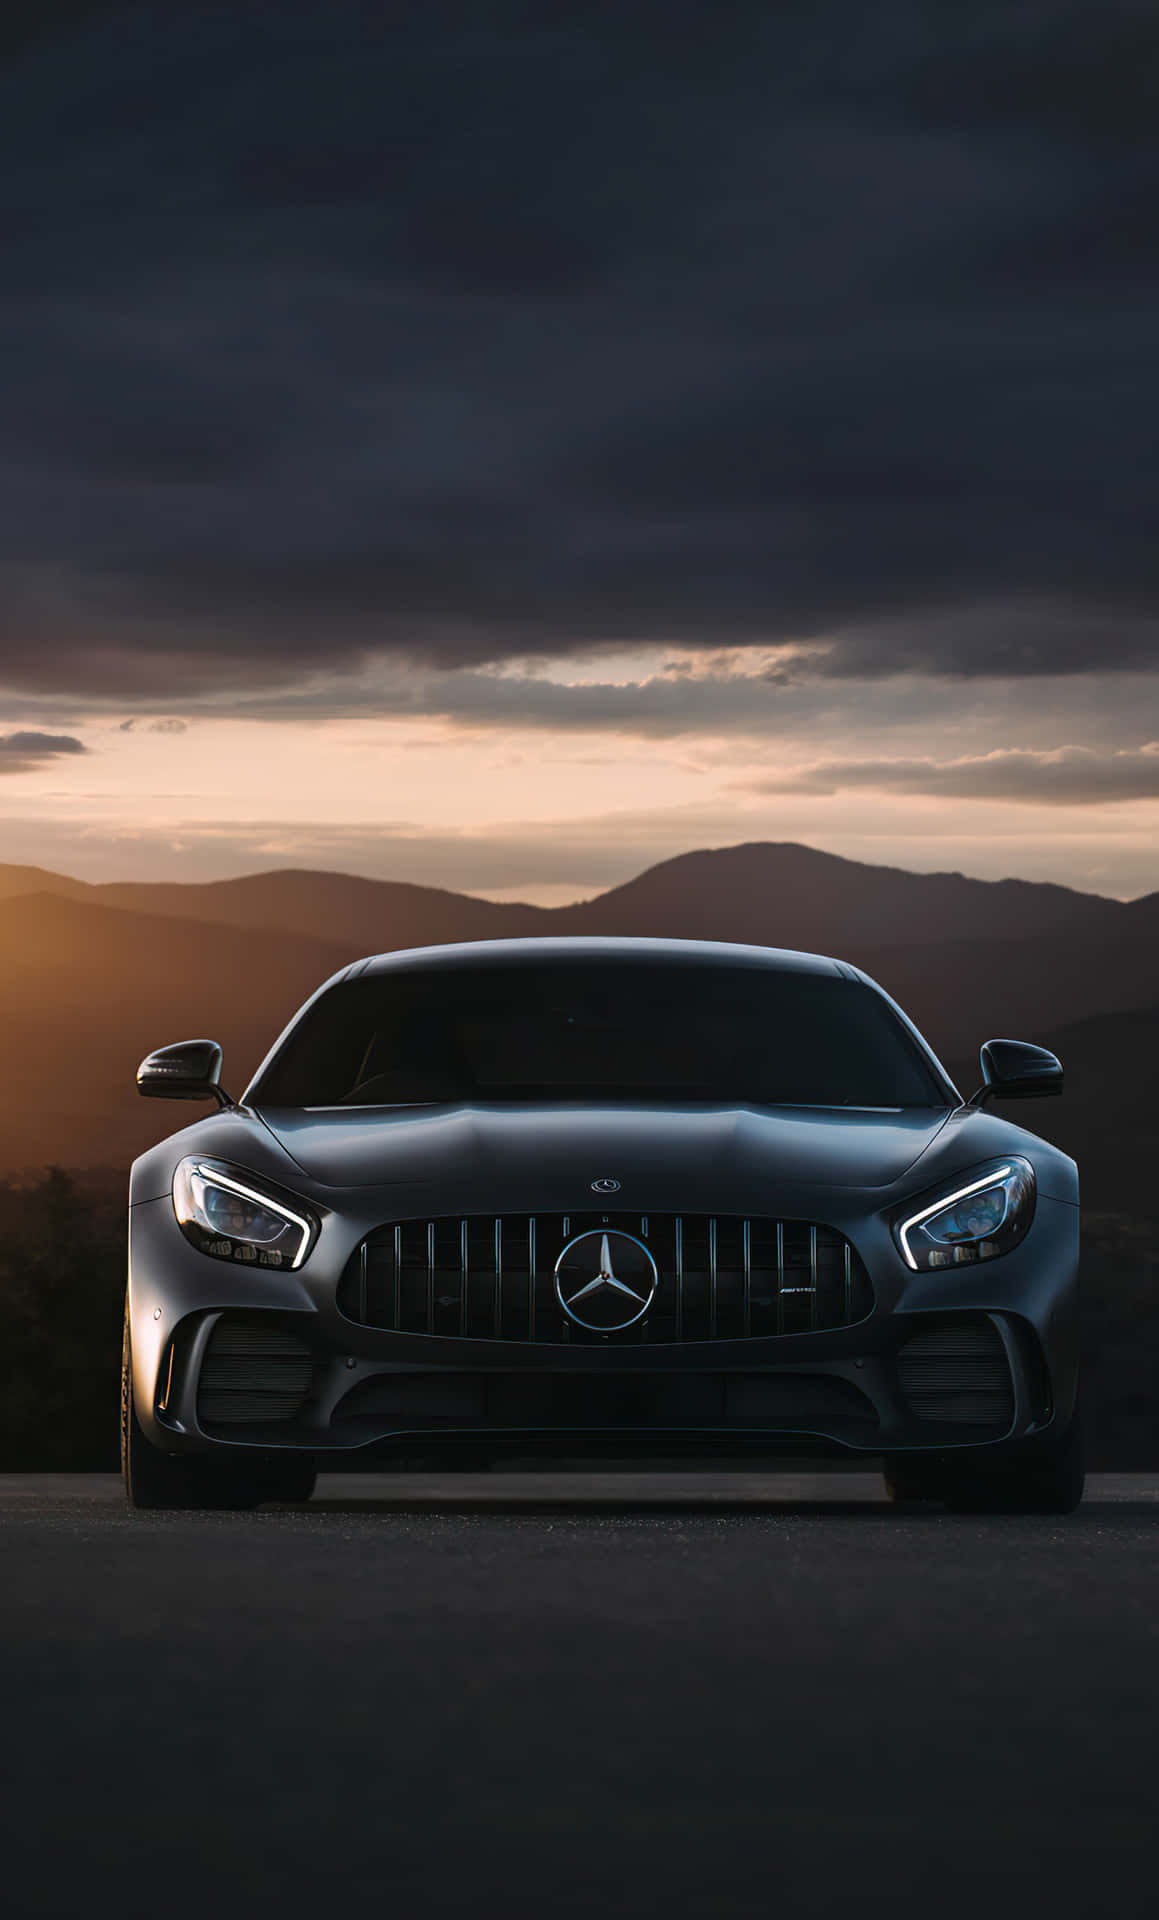 Style and Performance - Get the Mercedes Benz Iphone Today Wallpaper